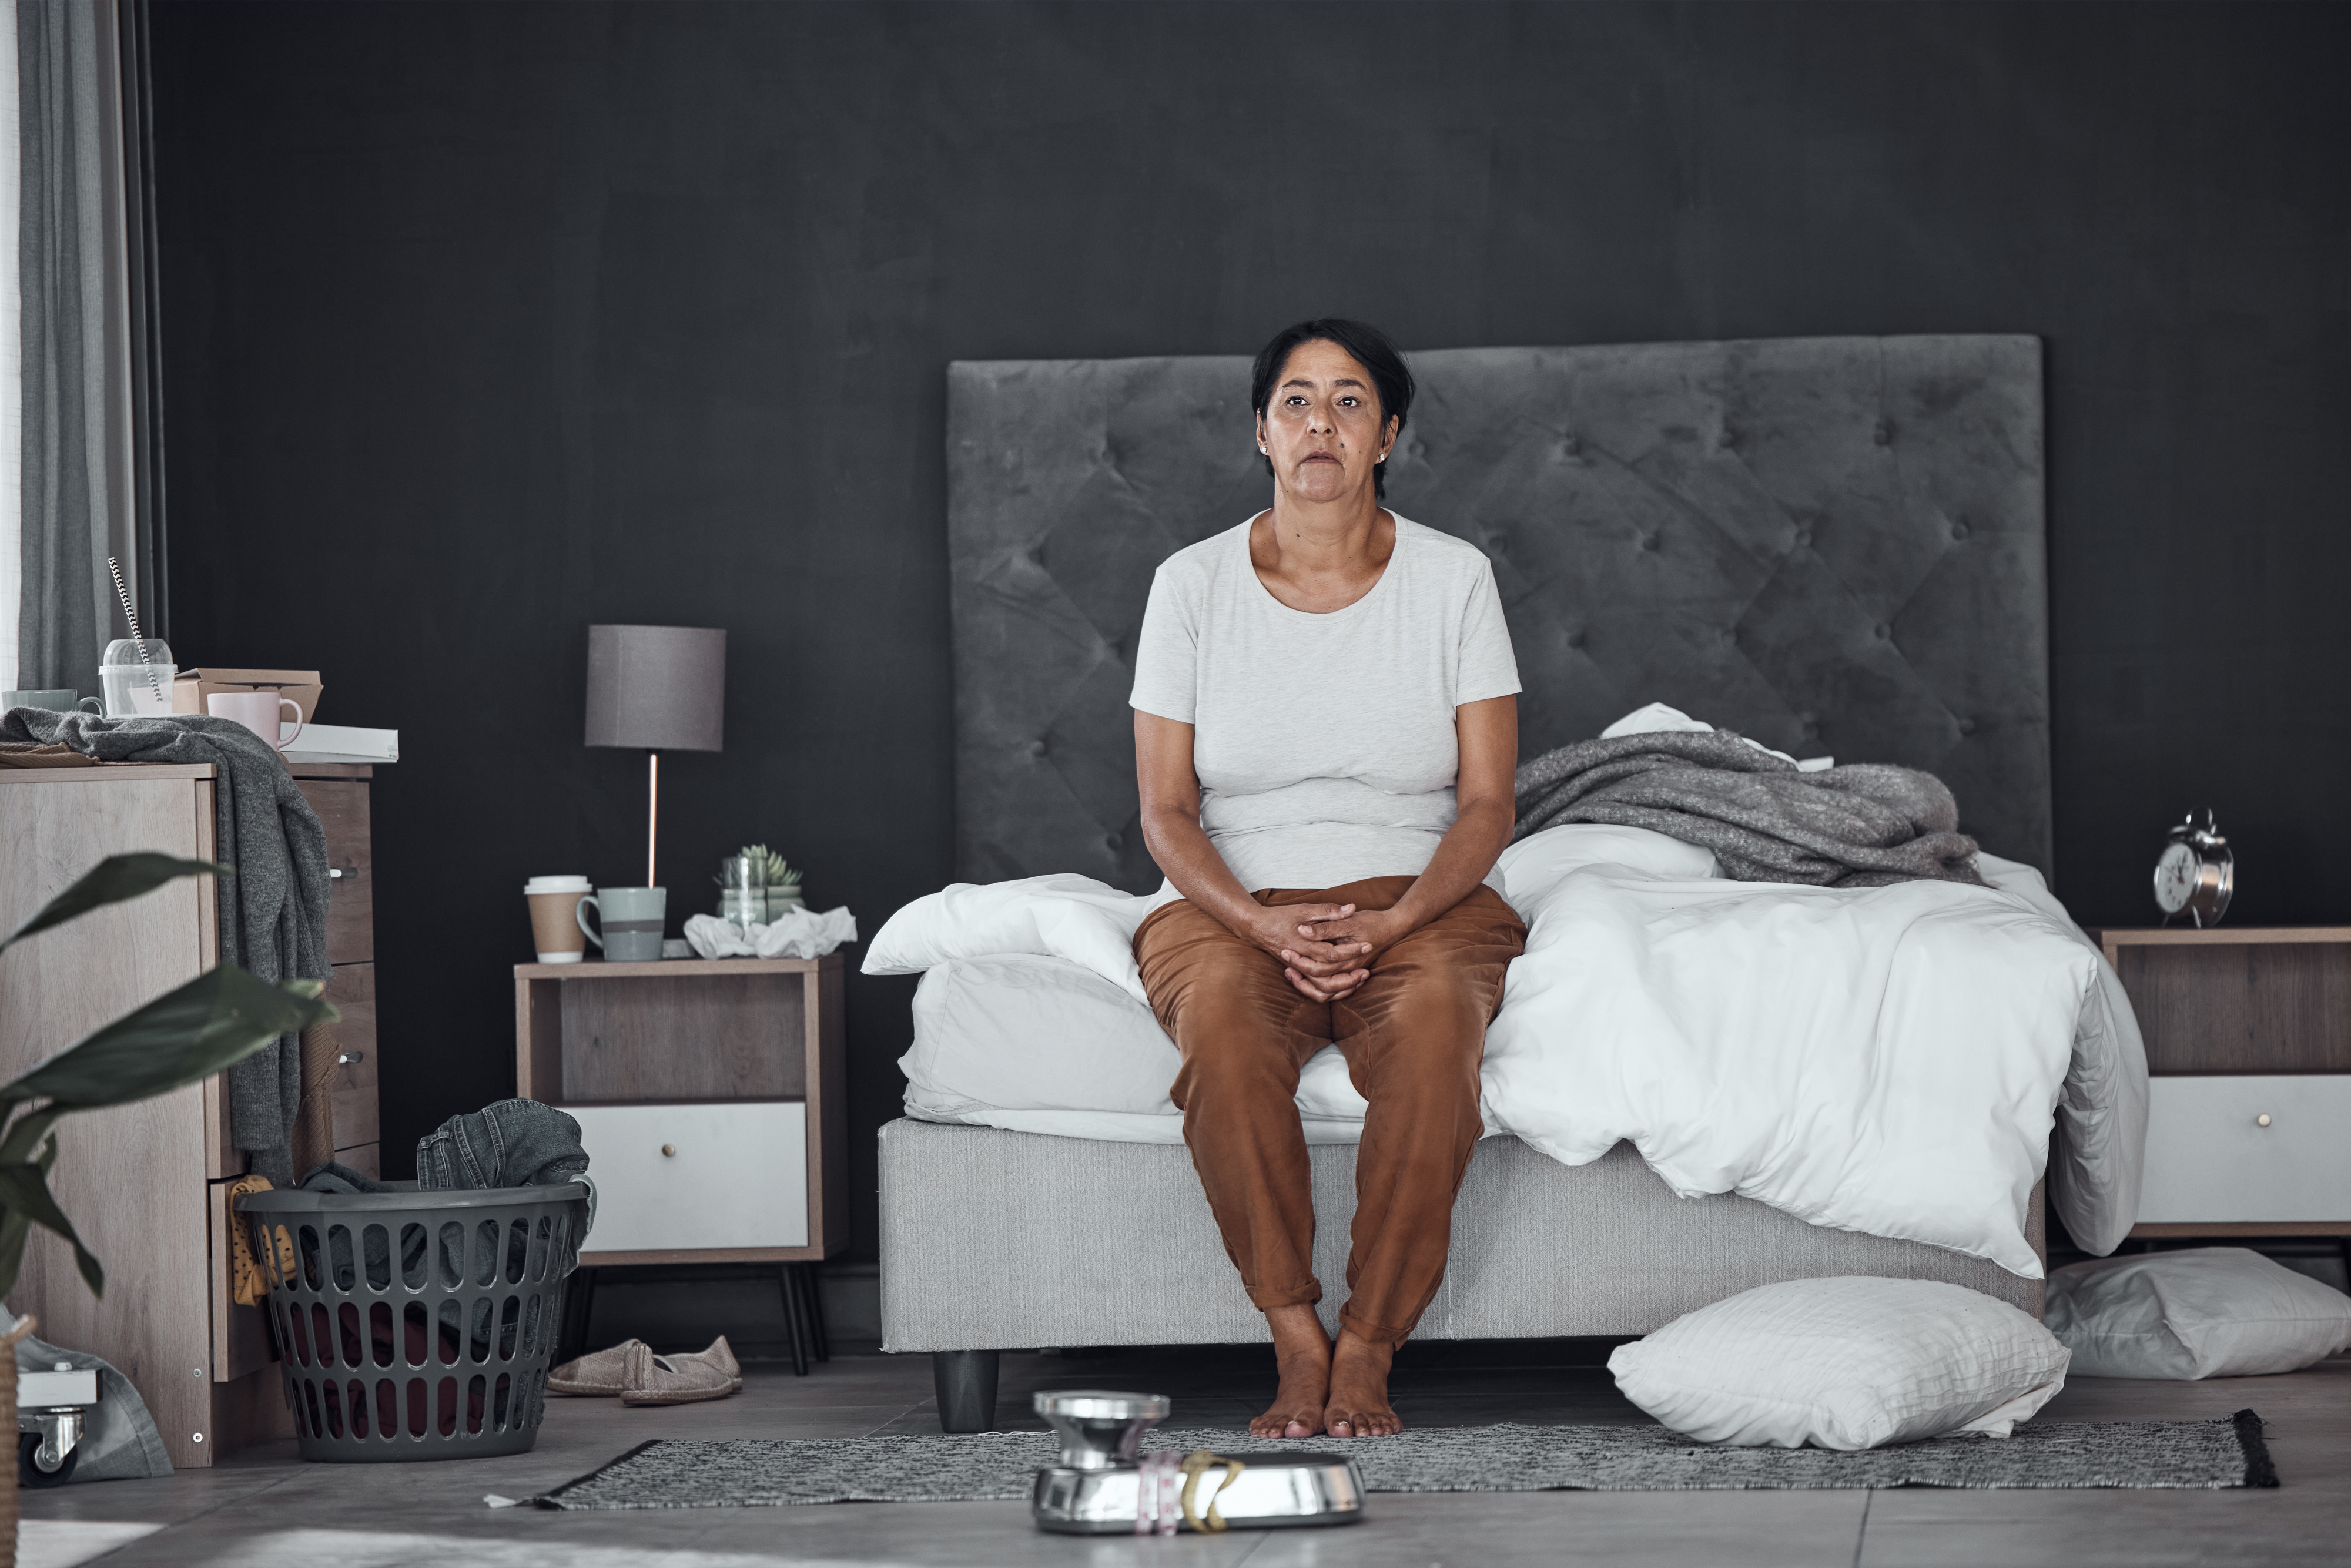 woman sitting at the edge of the bed with a mess around her